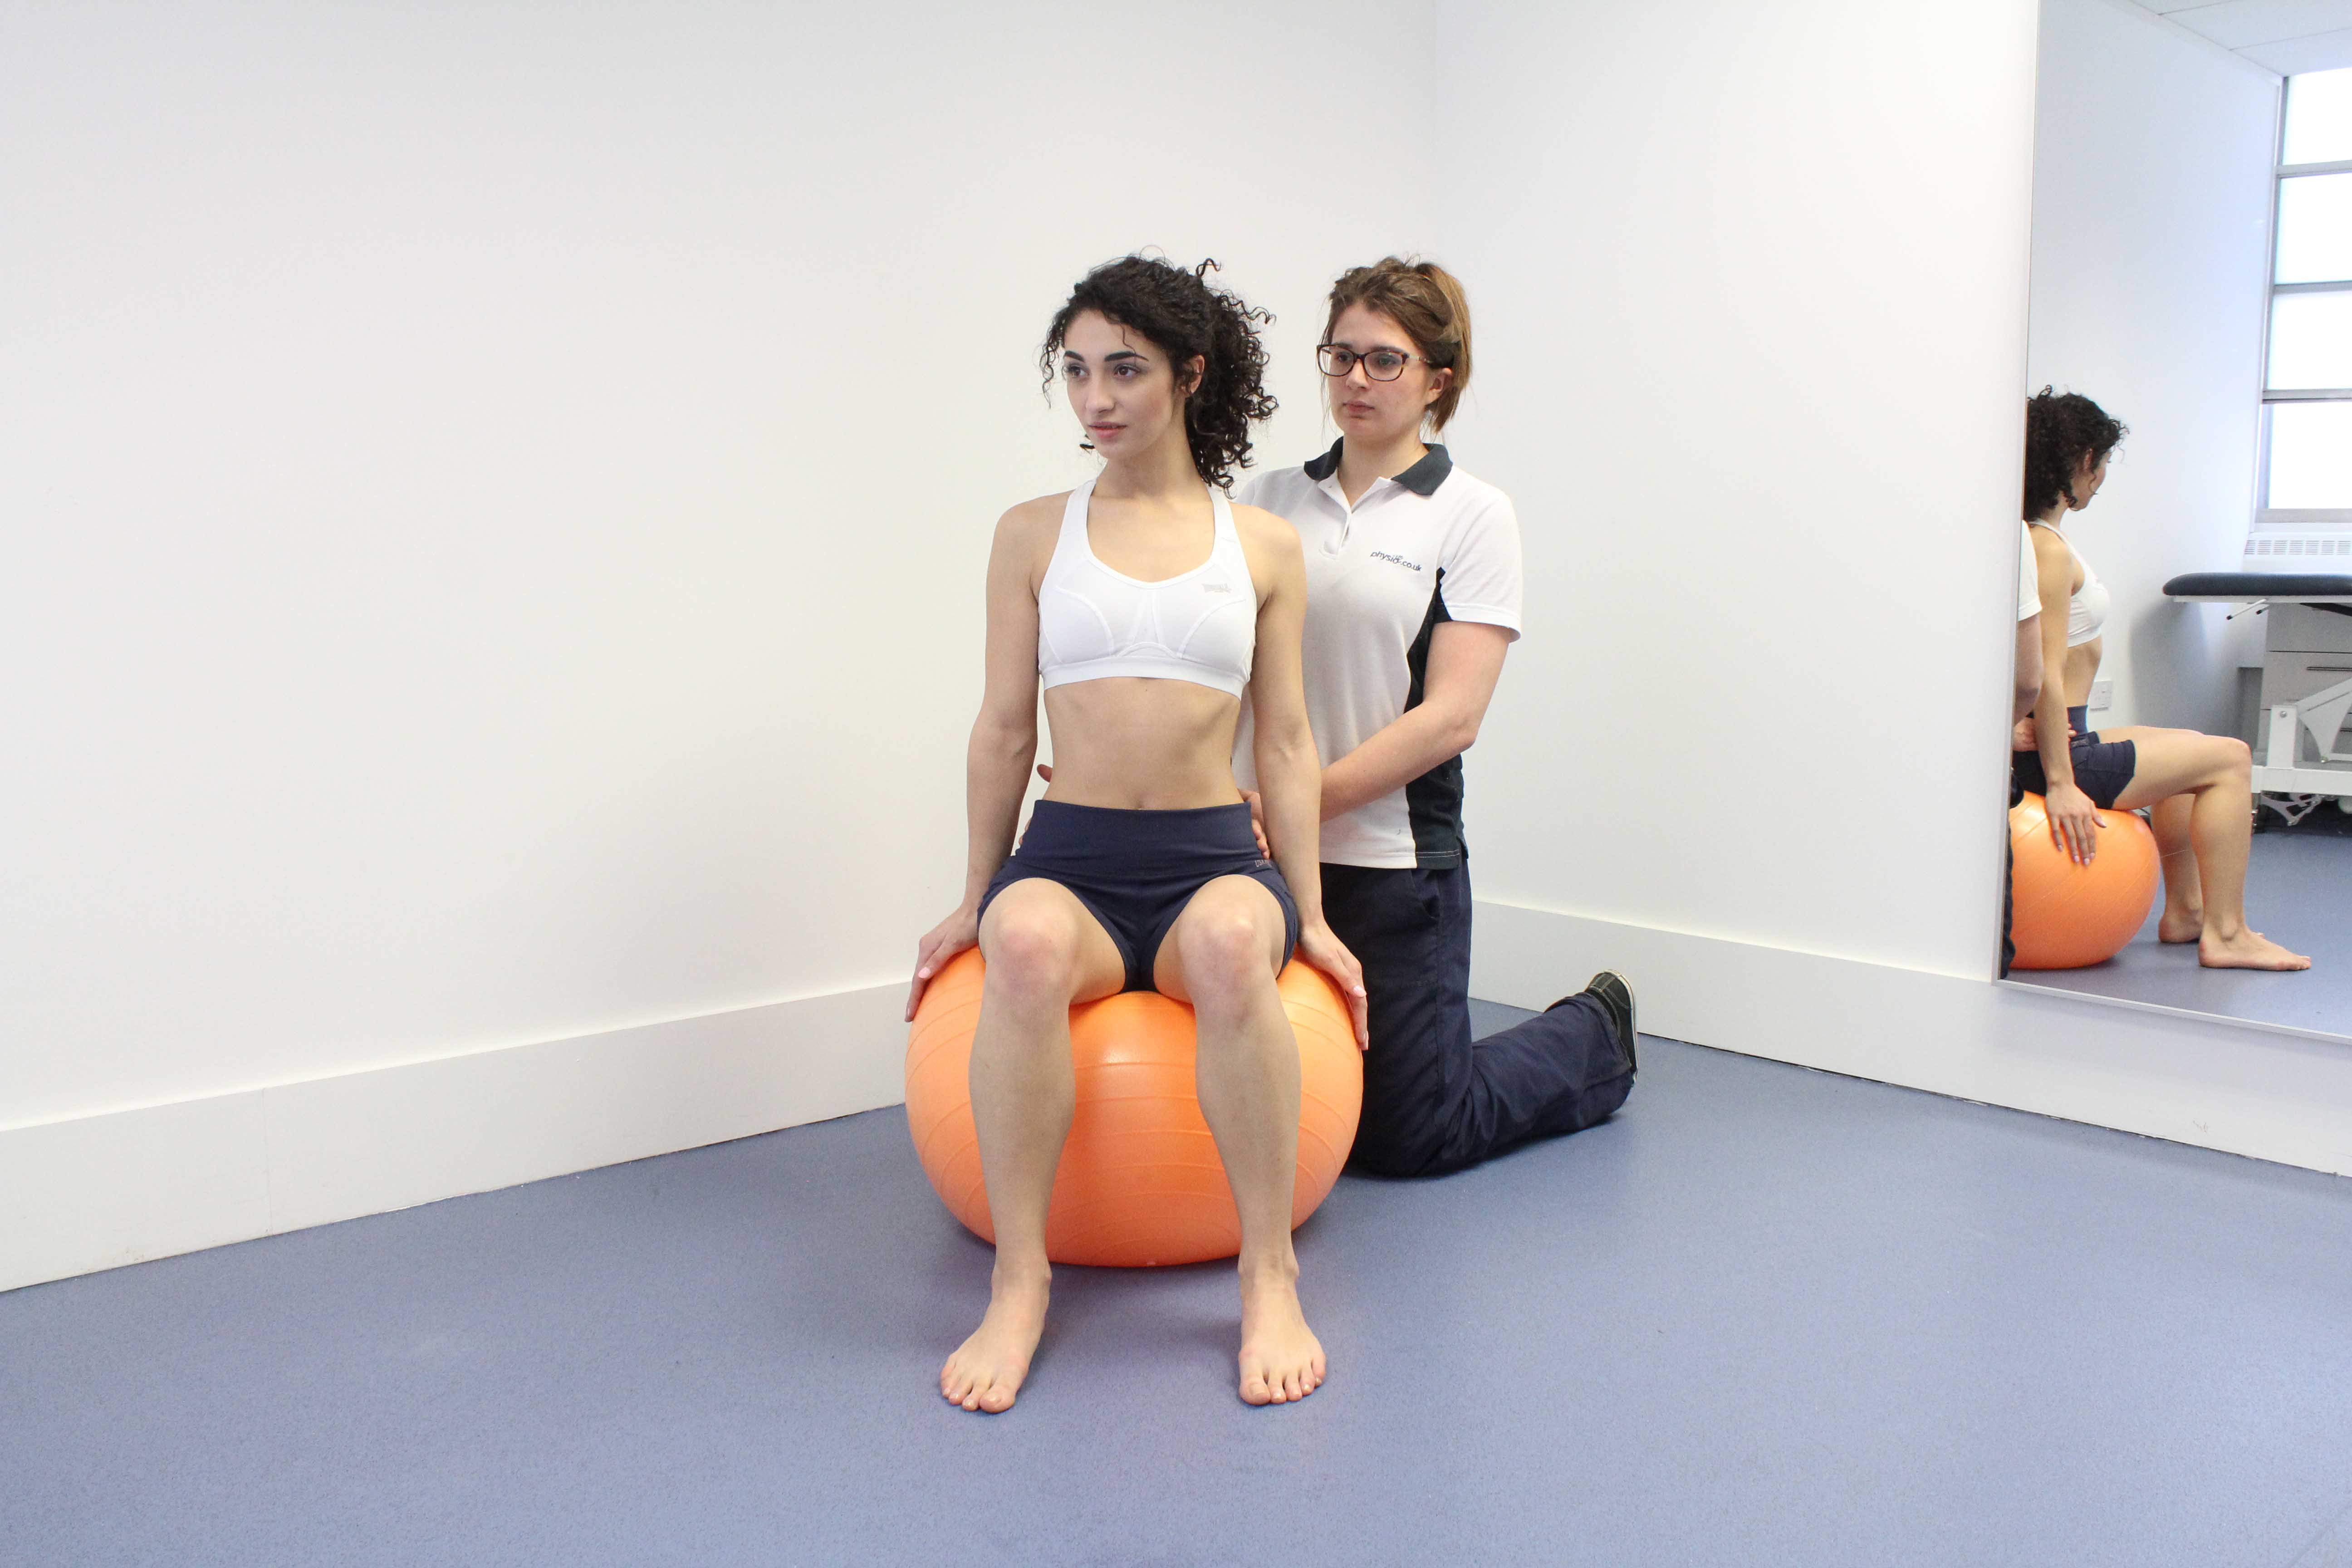 Active cycle of breathing exercises supervised by a specialist physiotherapist